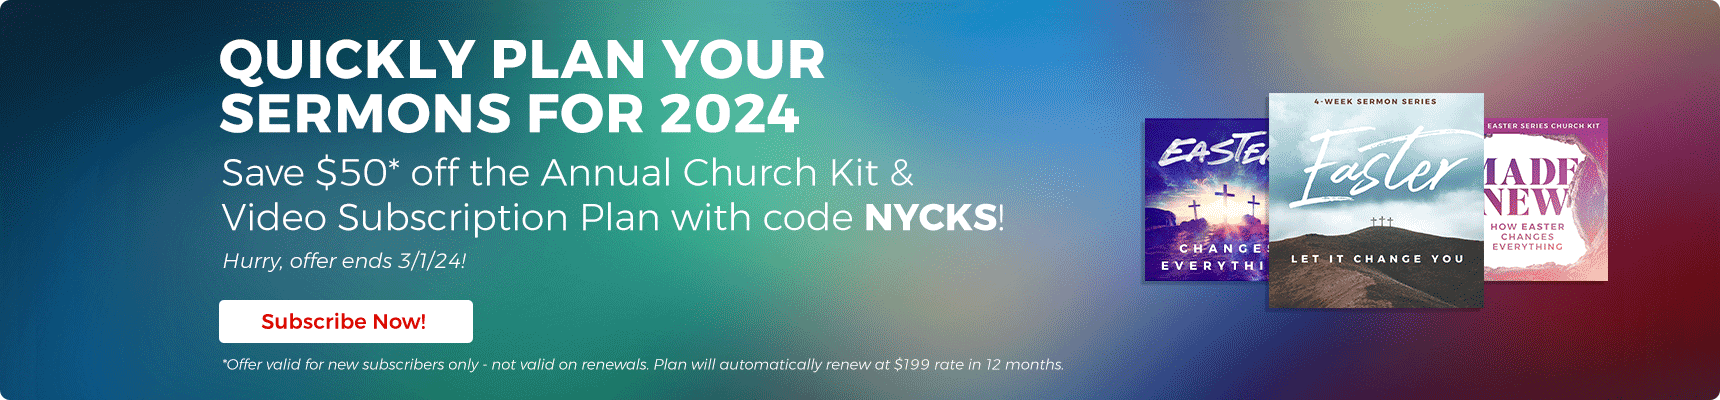 Unlock your church's outreach potential with over 50 church kits and videos, advent, easter, back to church. All church kits and videos only $149.